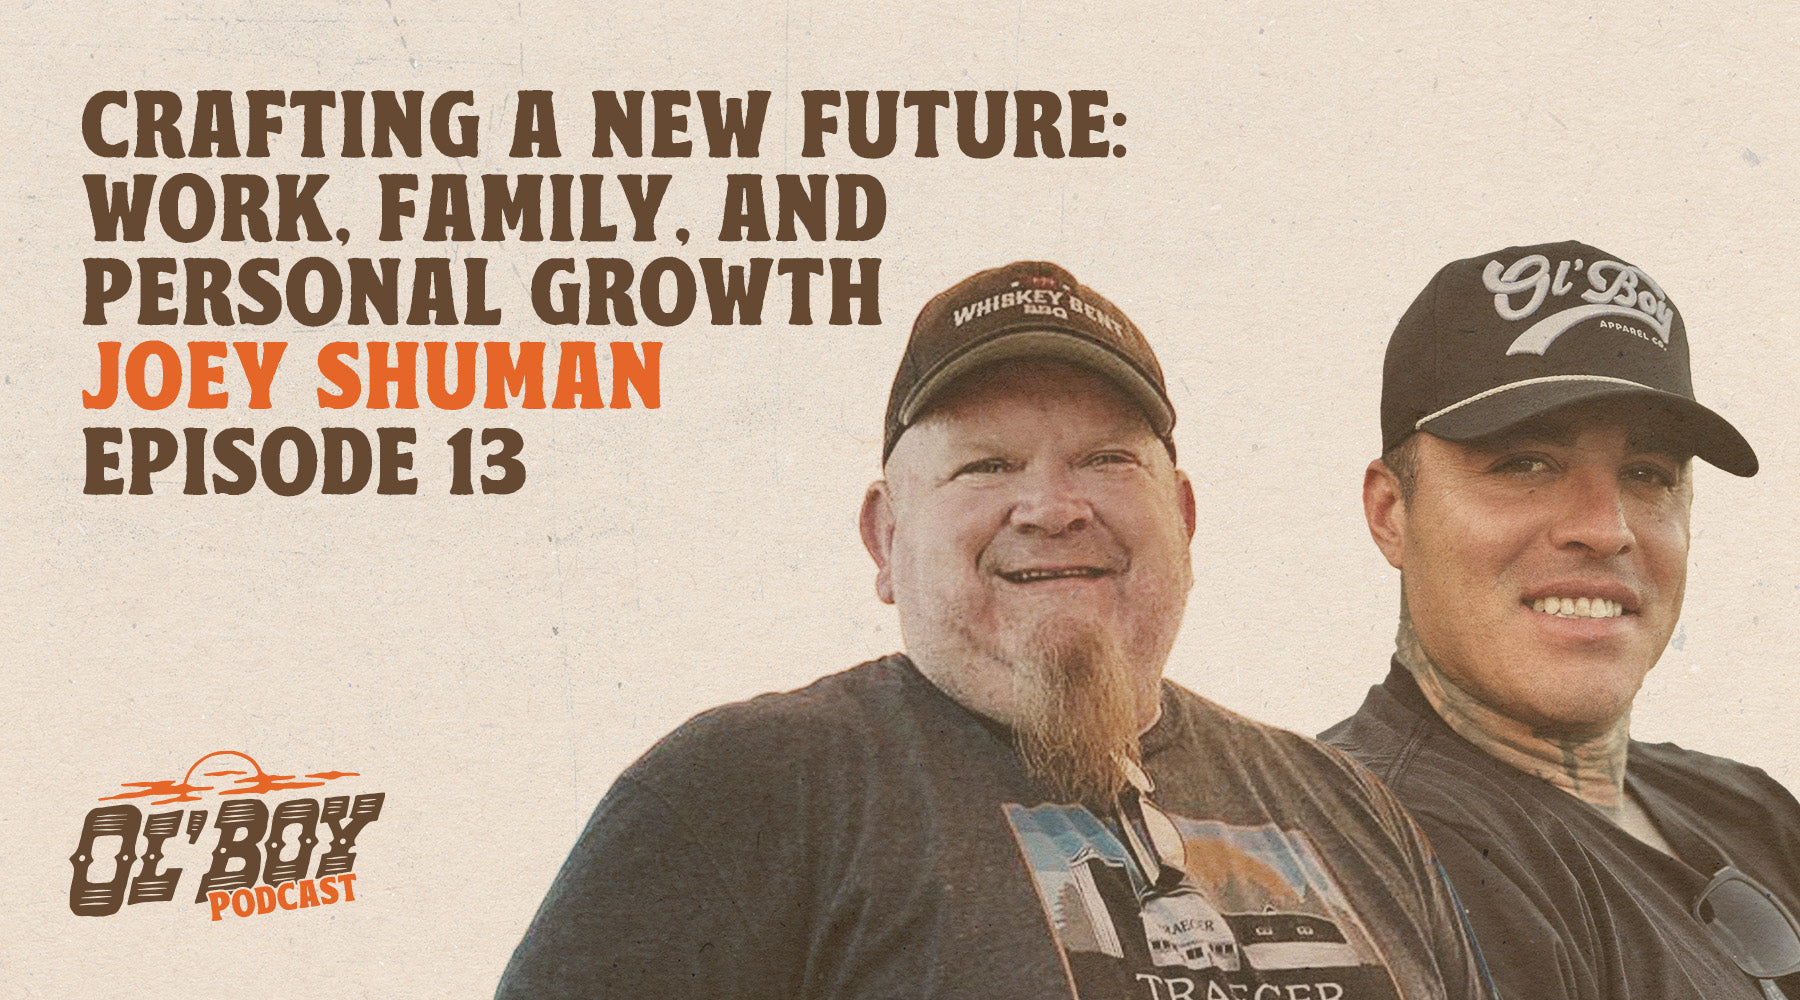 Episode 13 - Crafting a New Future: Joey Shuman on Work, Family, and Personal Transformation